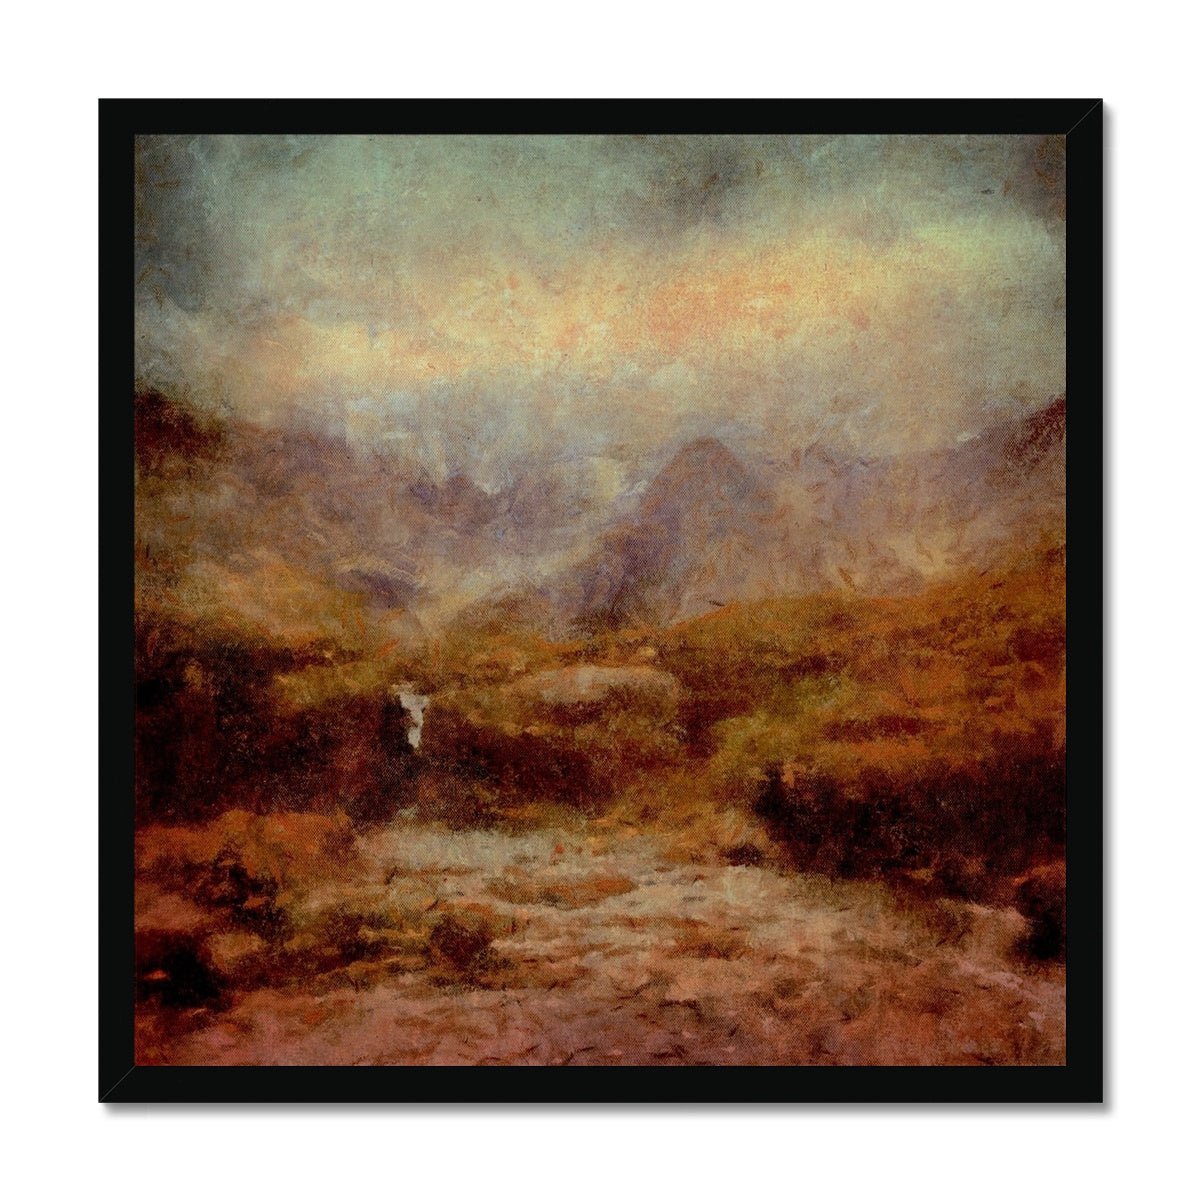 The Brooding Fairy Pools Skye Painting | Framed Prints From Scotland-Framed Prints-Skye Art Gallery-20"x20"-Black Frame-Paintings, Prints, Homeware, Art Gifts From Scotland By Scottish Artist Kevin Hunter